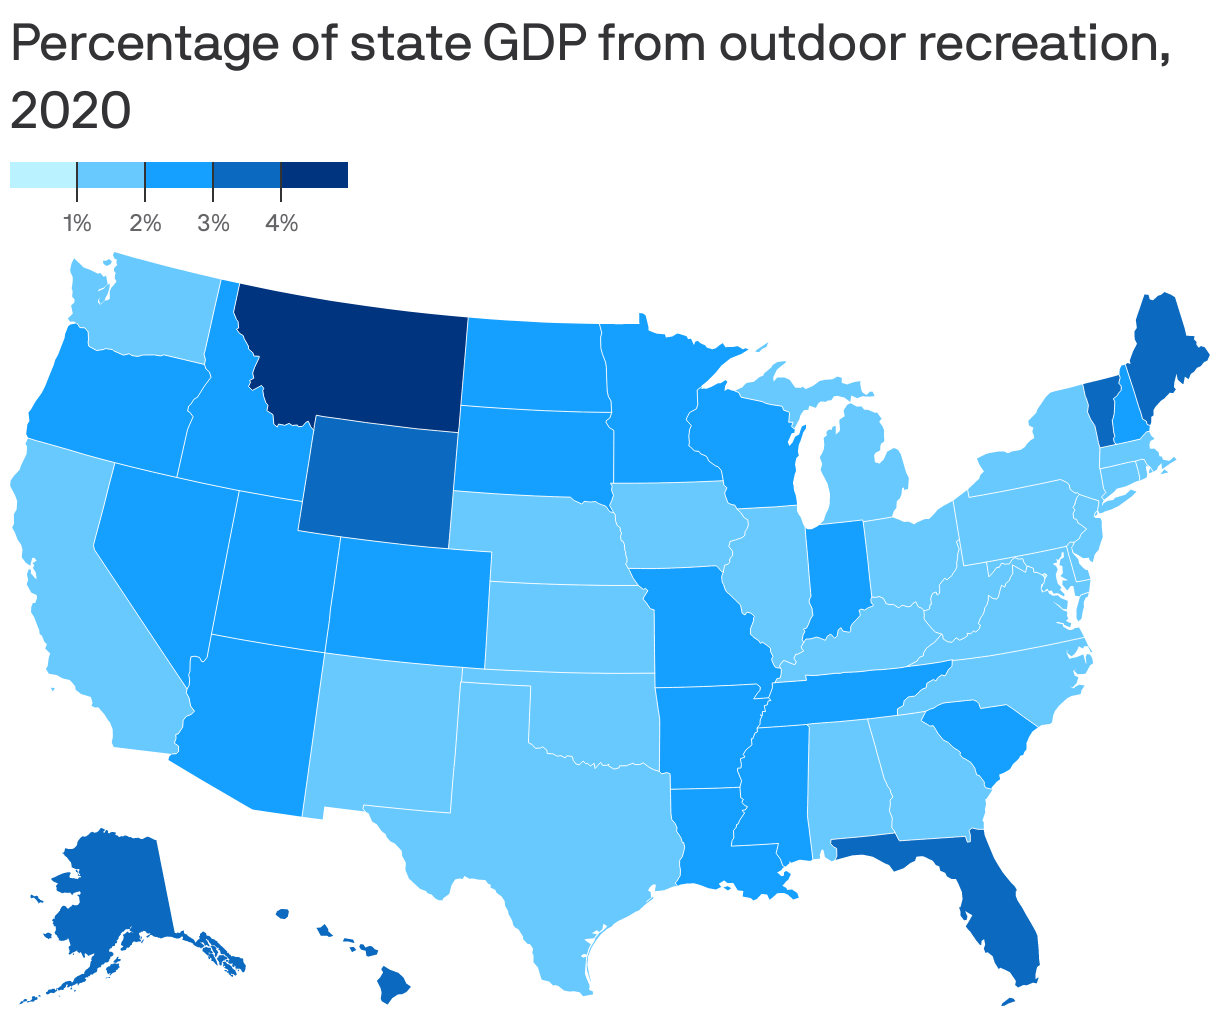 Percentage of state GDP from outdoor recreation, 2020